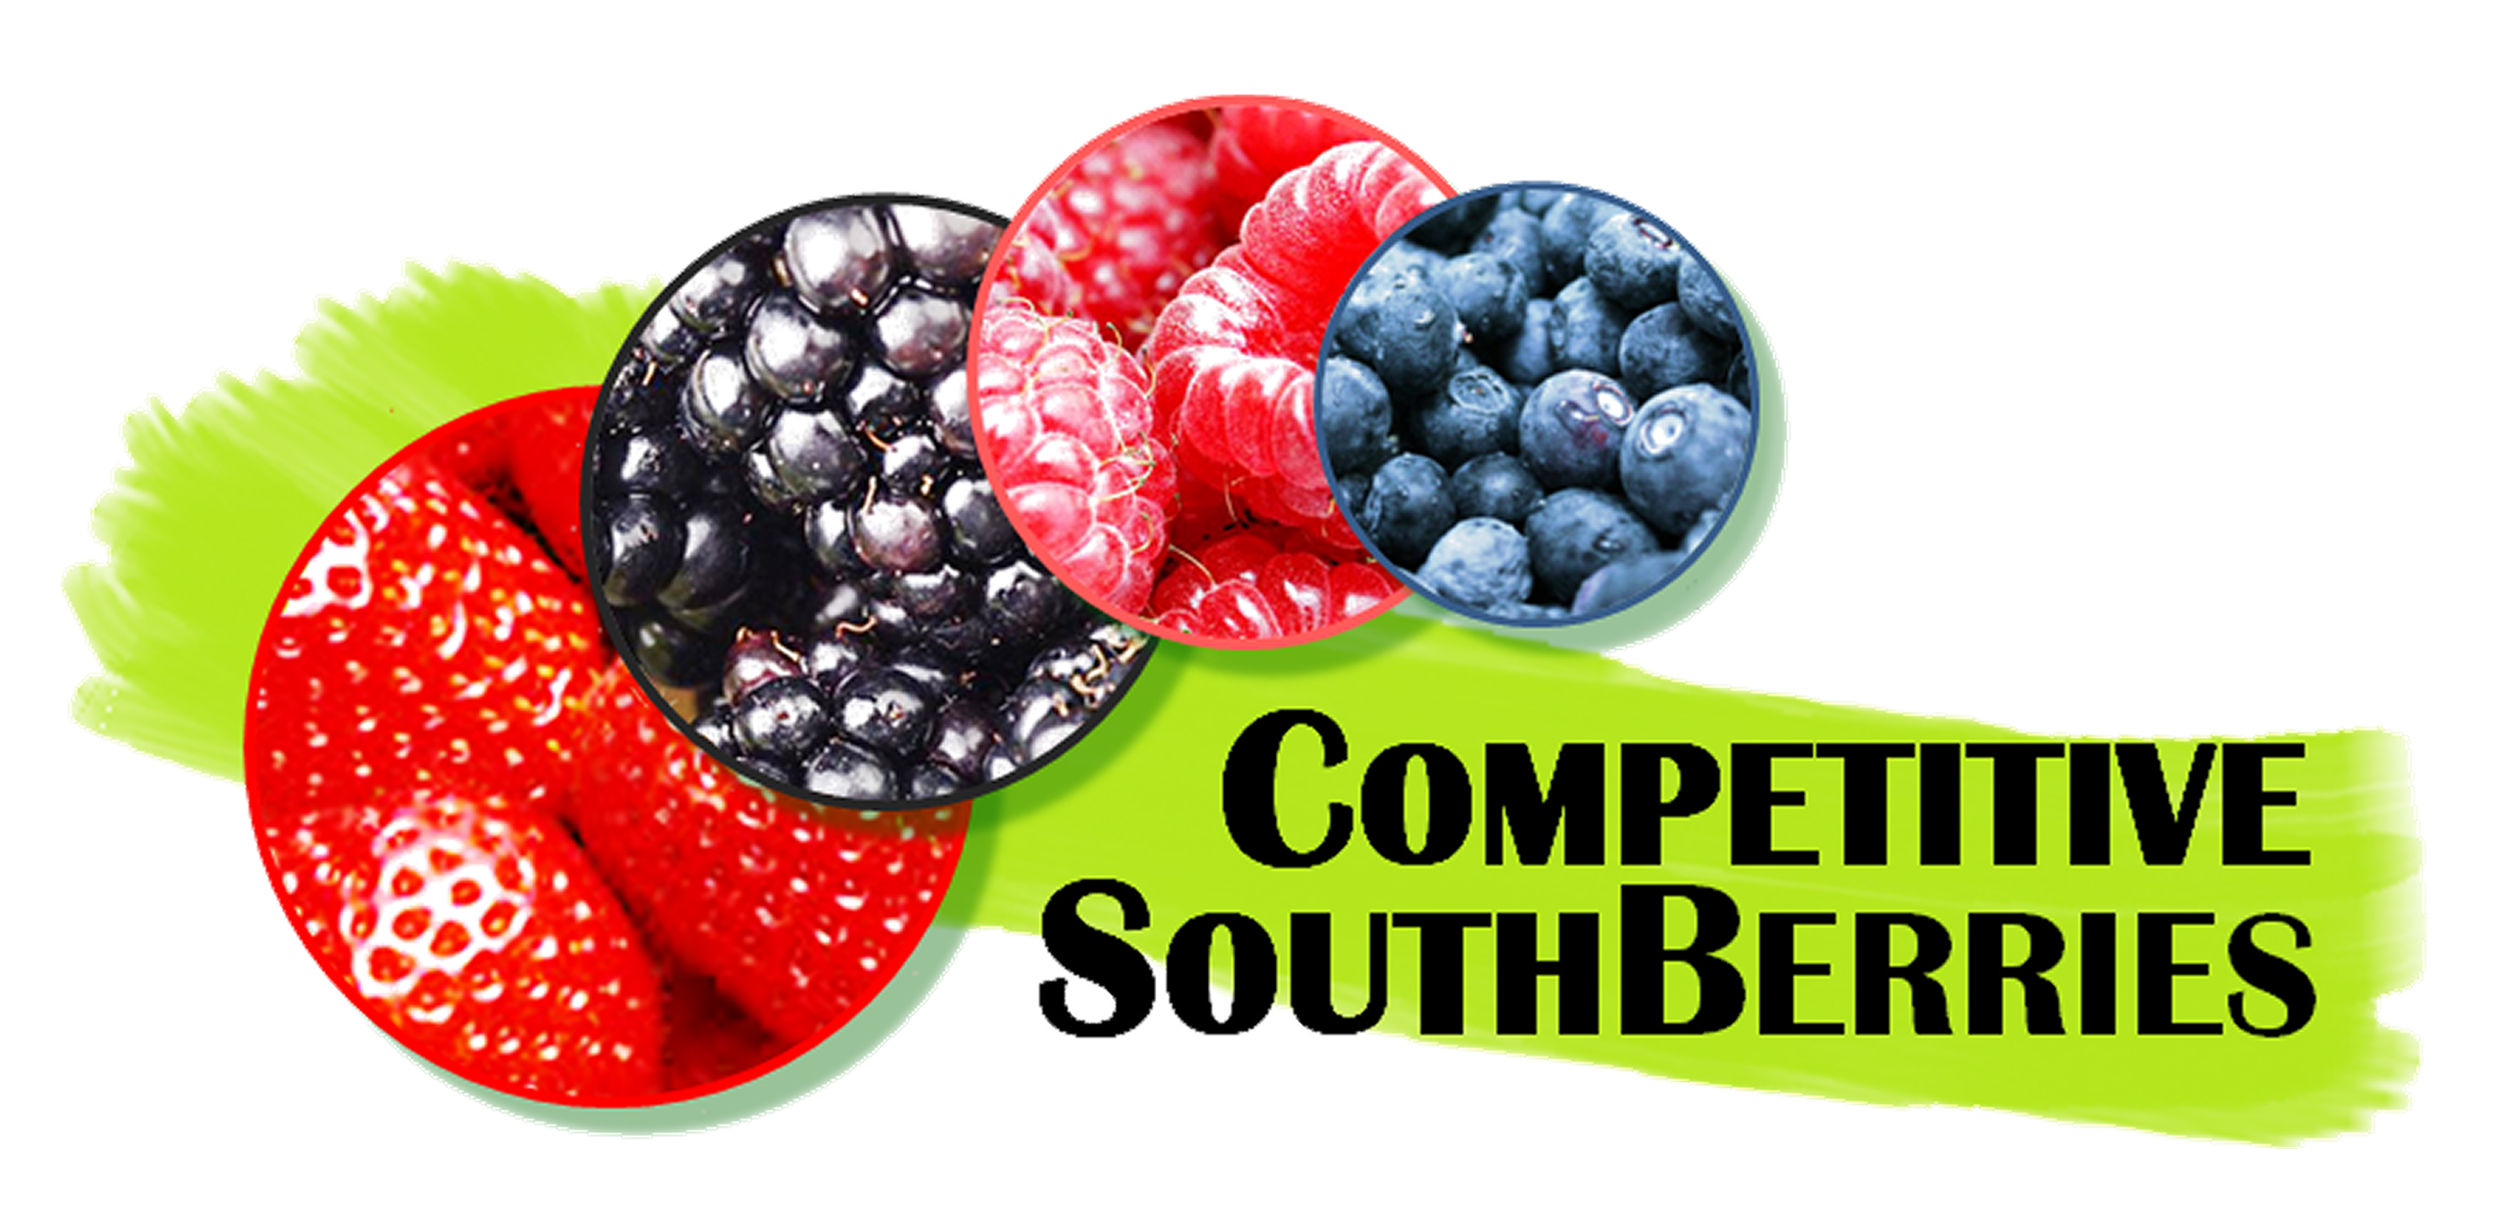 CompetitiveSouthBerries